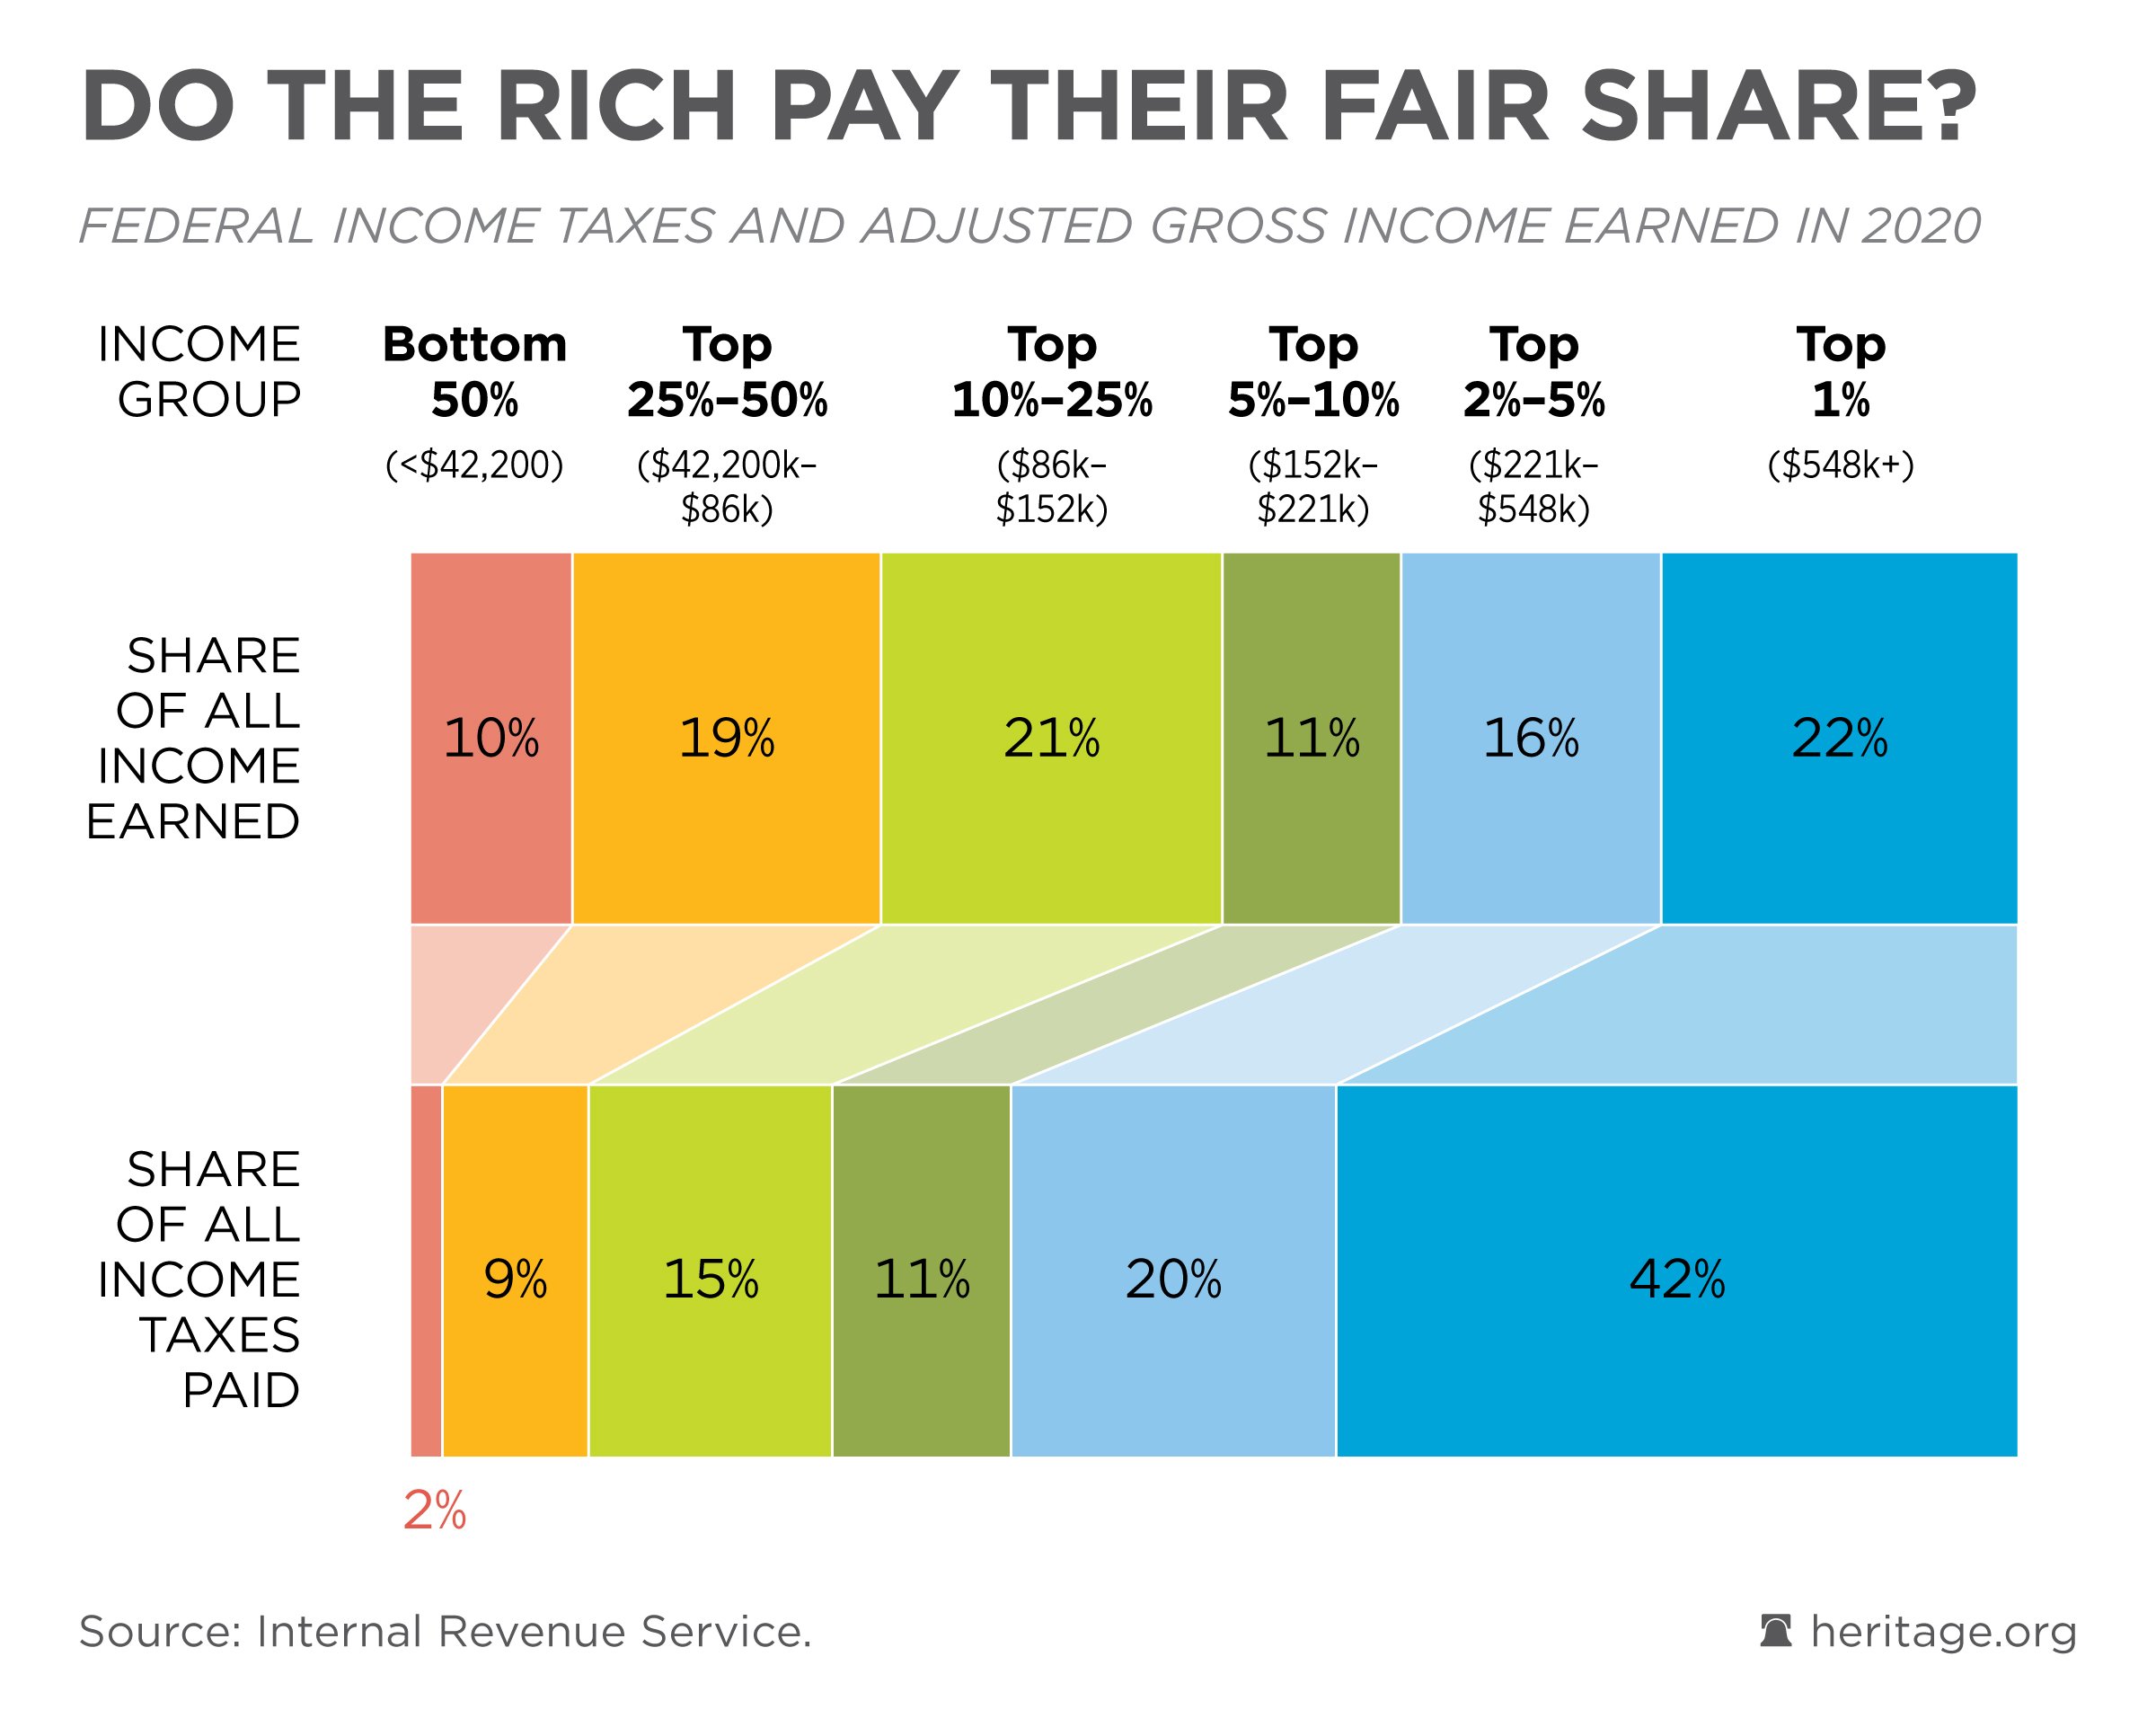 Chart from heritage.org/IRS showing percentage of federal income taxes paid by each income group.